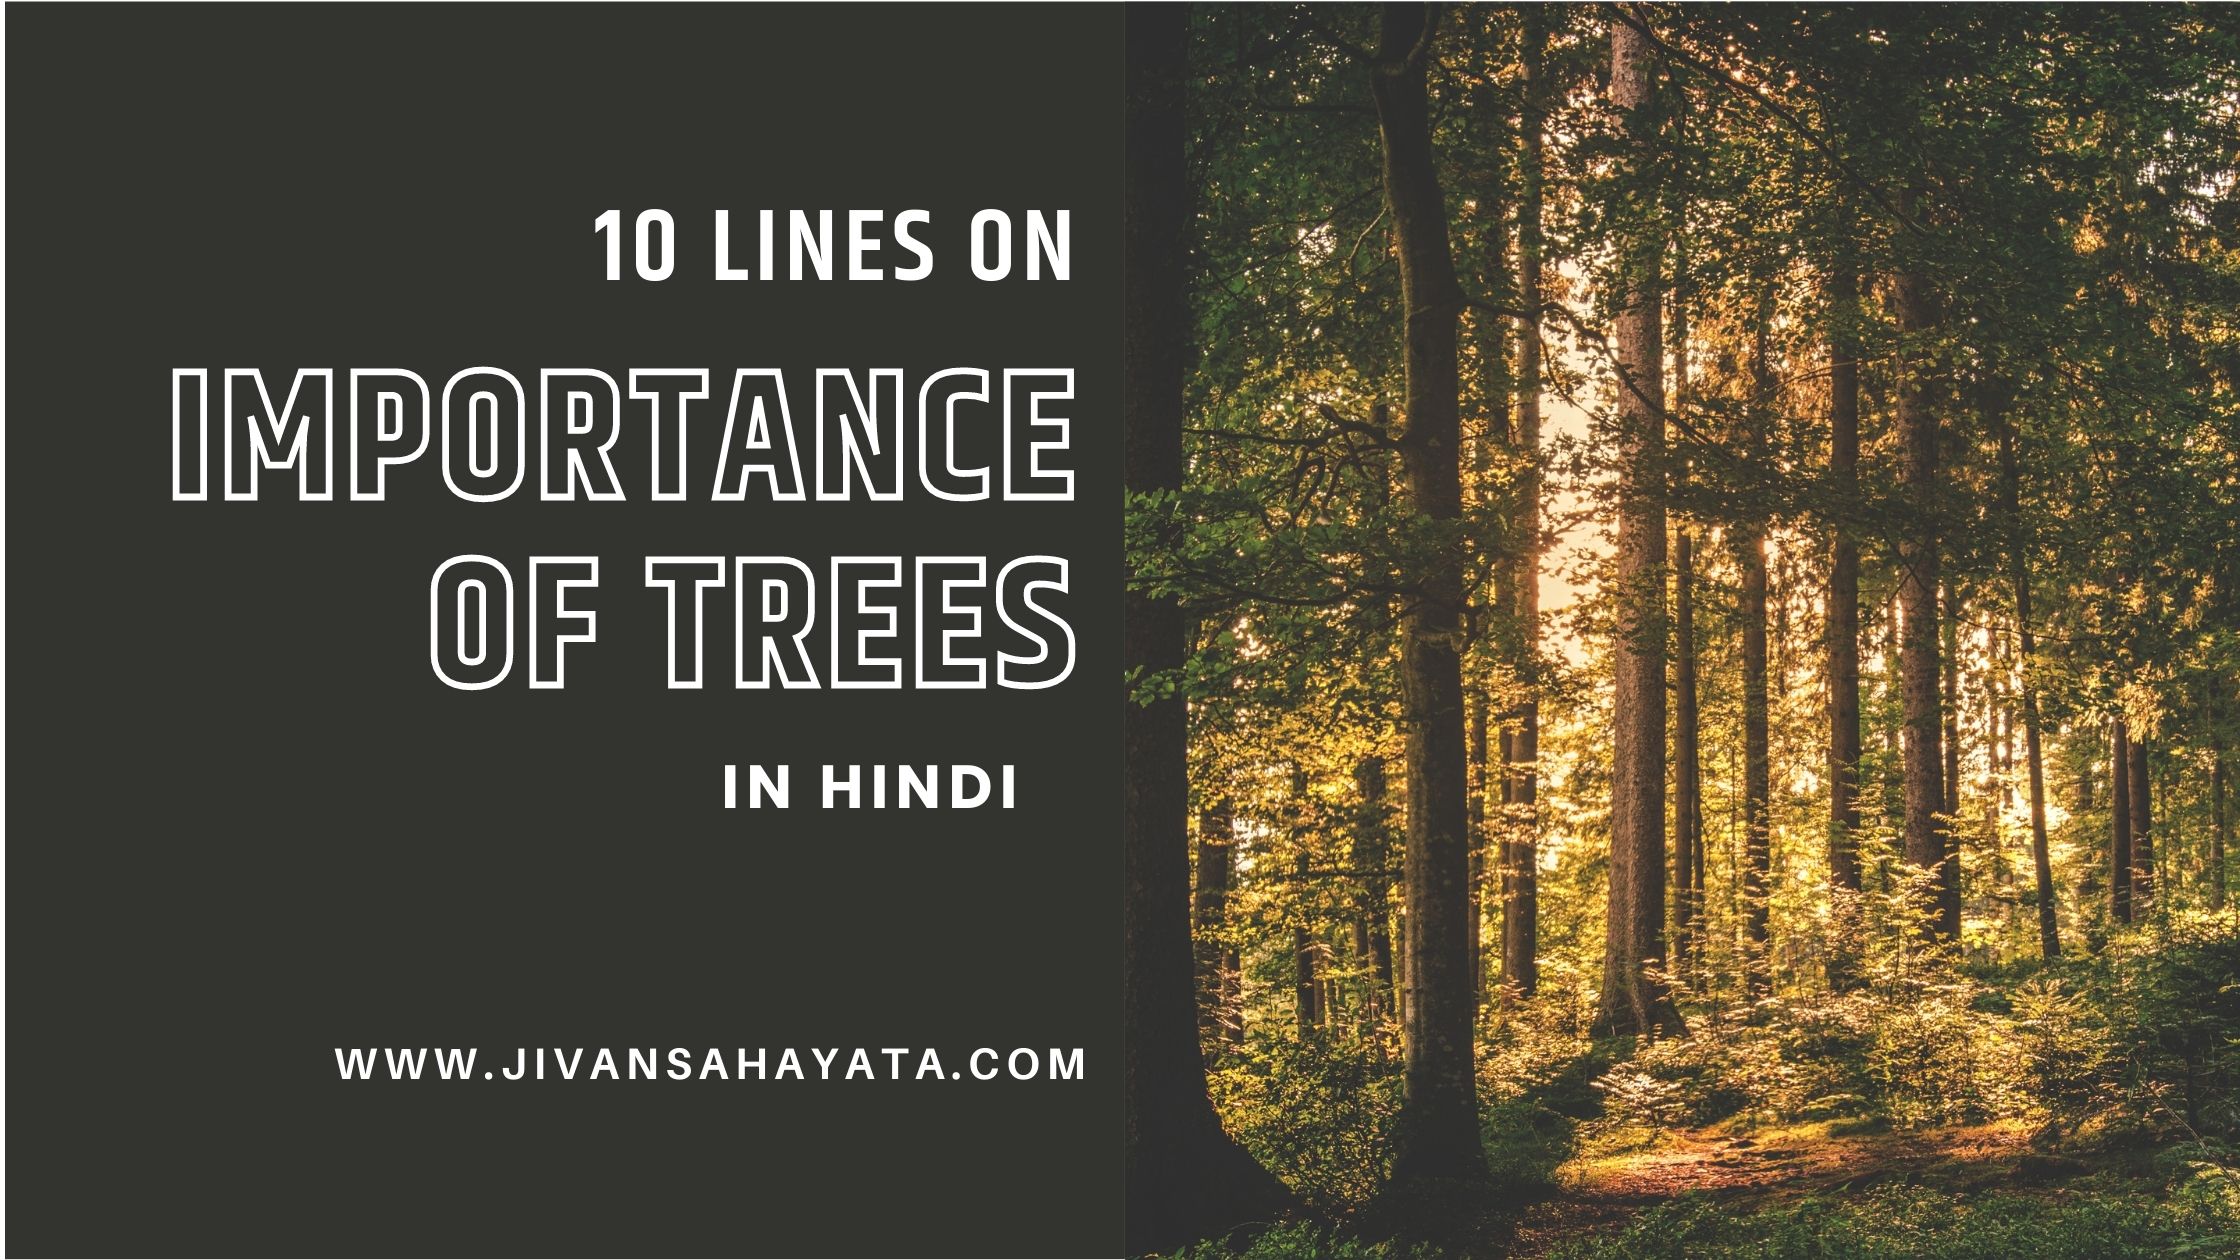 10 Lines On Importance Of Trees In Hindi - पेड़ का महत्व पर 10 लाइन